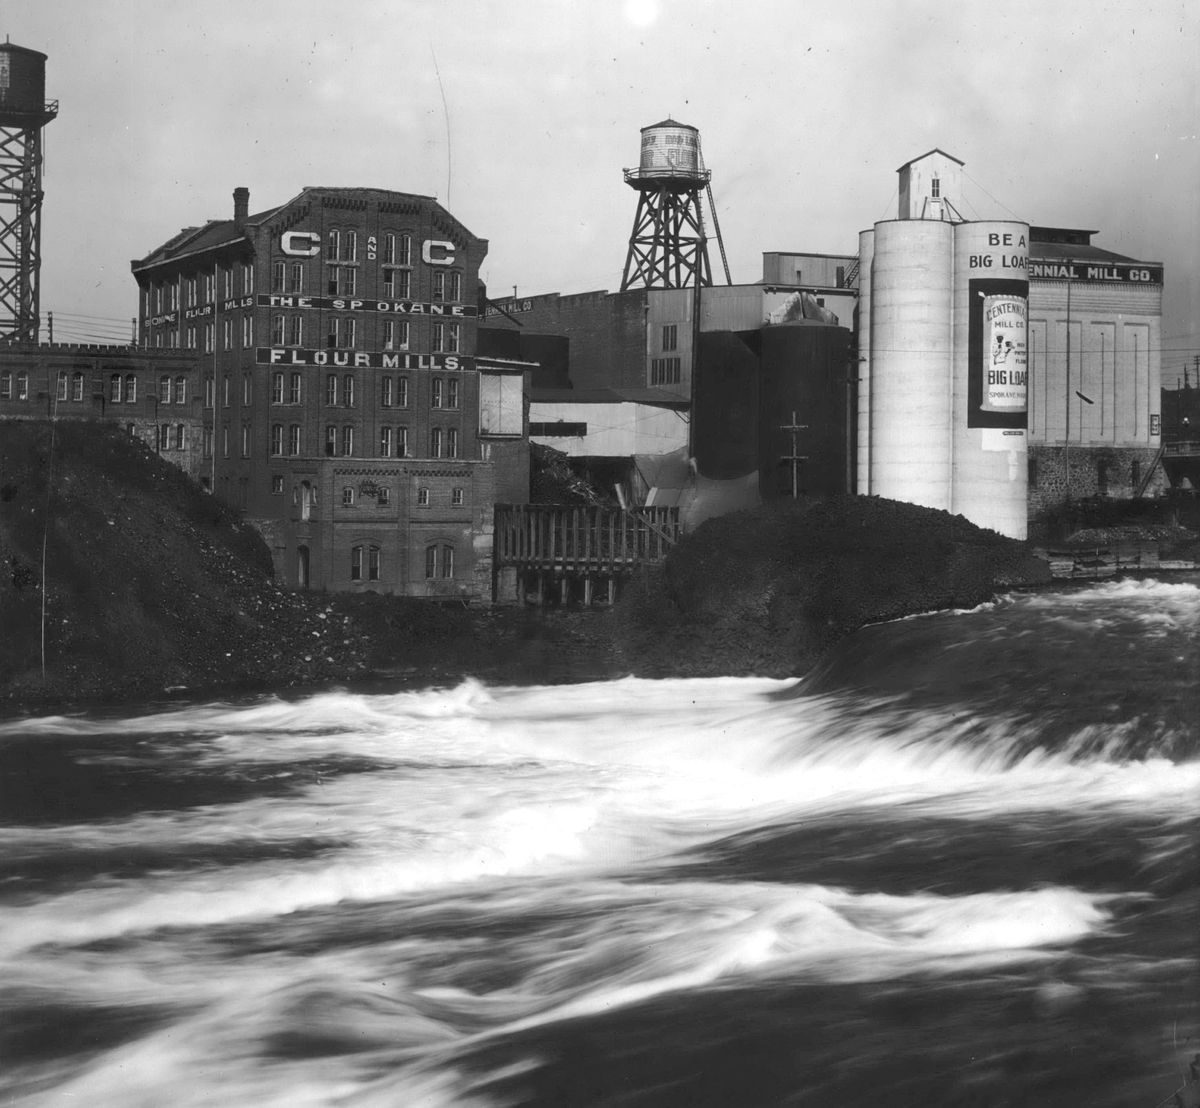 Circa 1910 - Spokane Flour Mill, left, and Centennial Mill, right, sat side by side on the north bank of the Spokane River, using water power to mill wheat into flour. They were two of four major riverside mills that were built in Spokane’s earliest days. (Frank Palmer / SR)